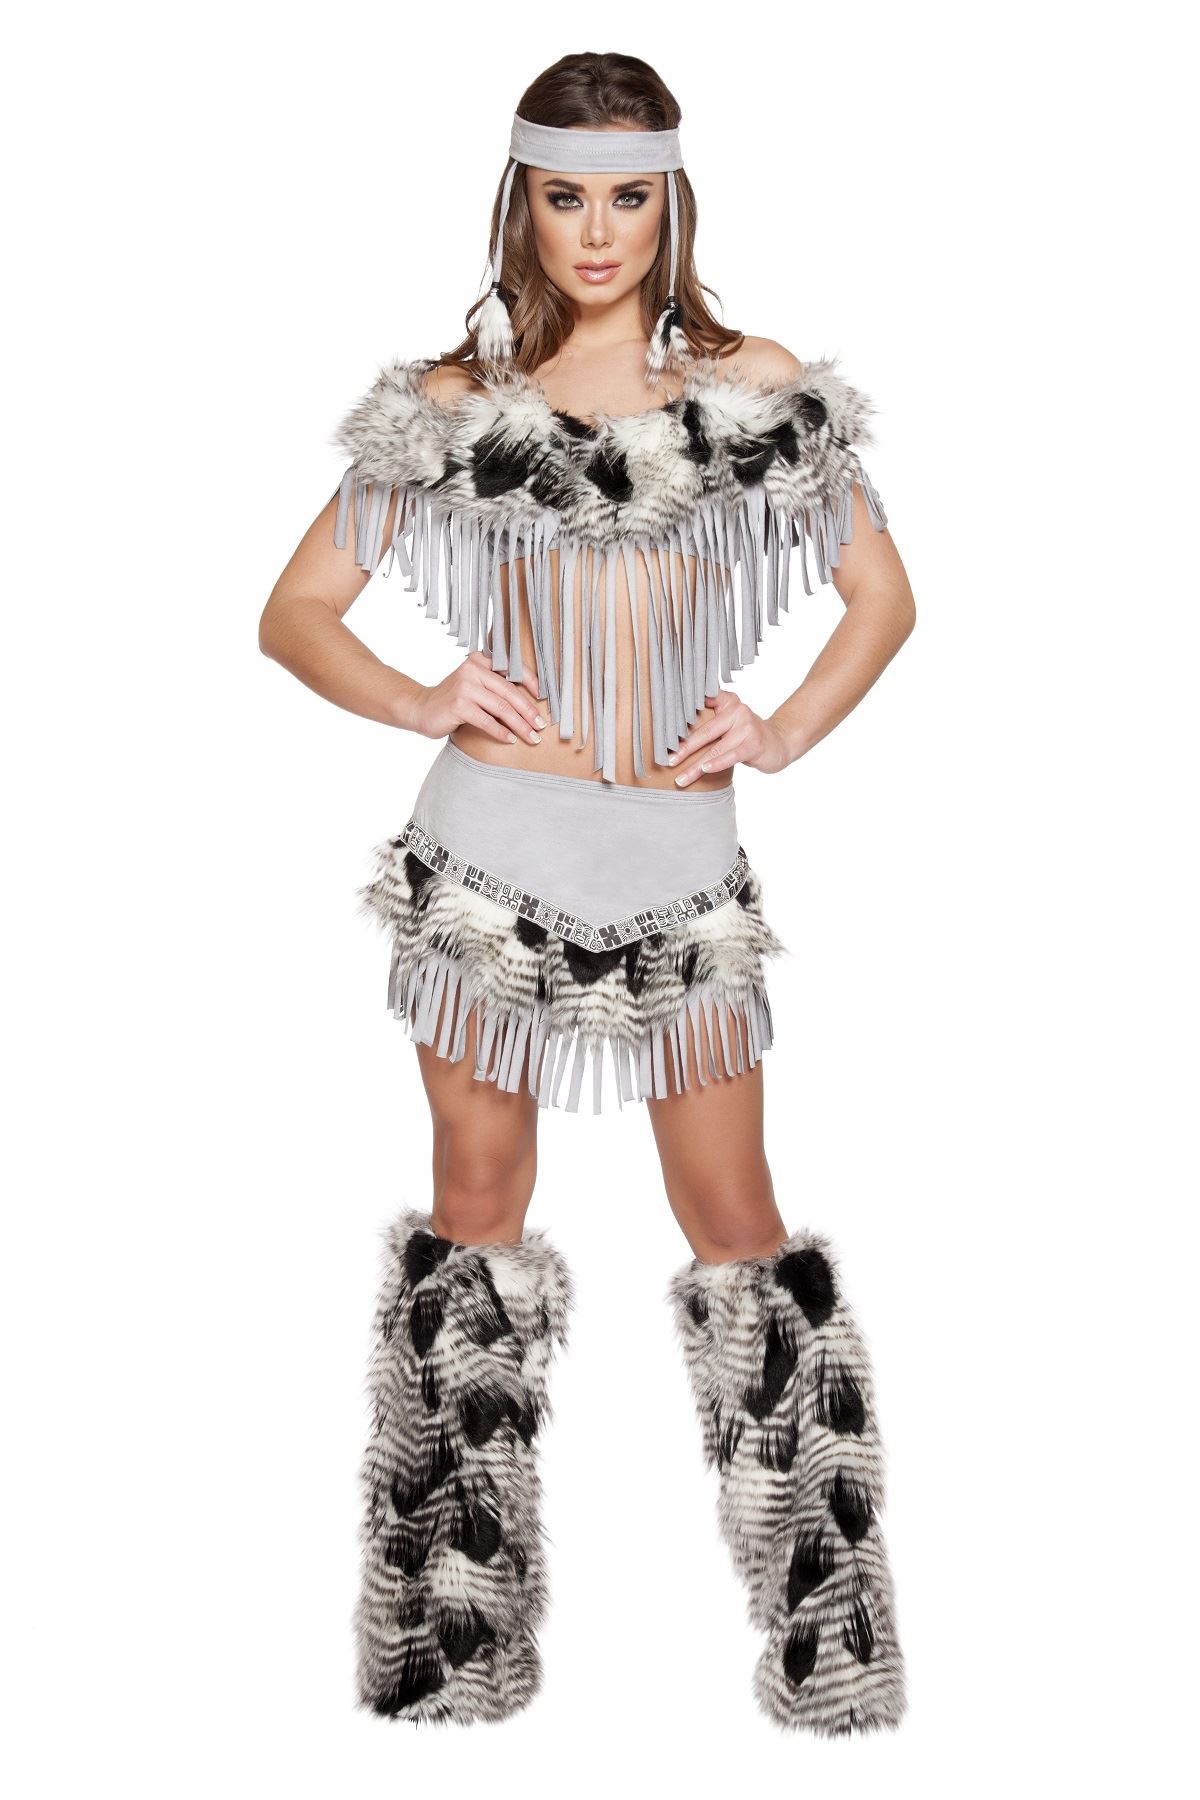 Adult Native American Indian Maiden Woman Costume 85 99